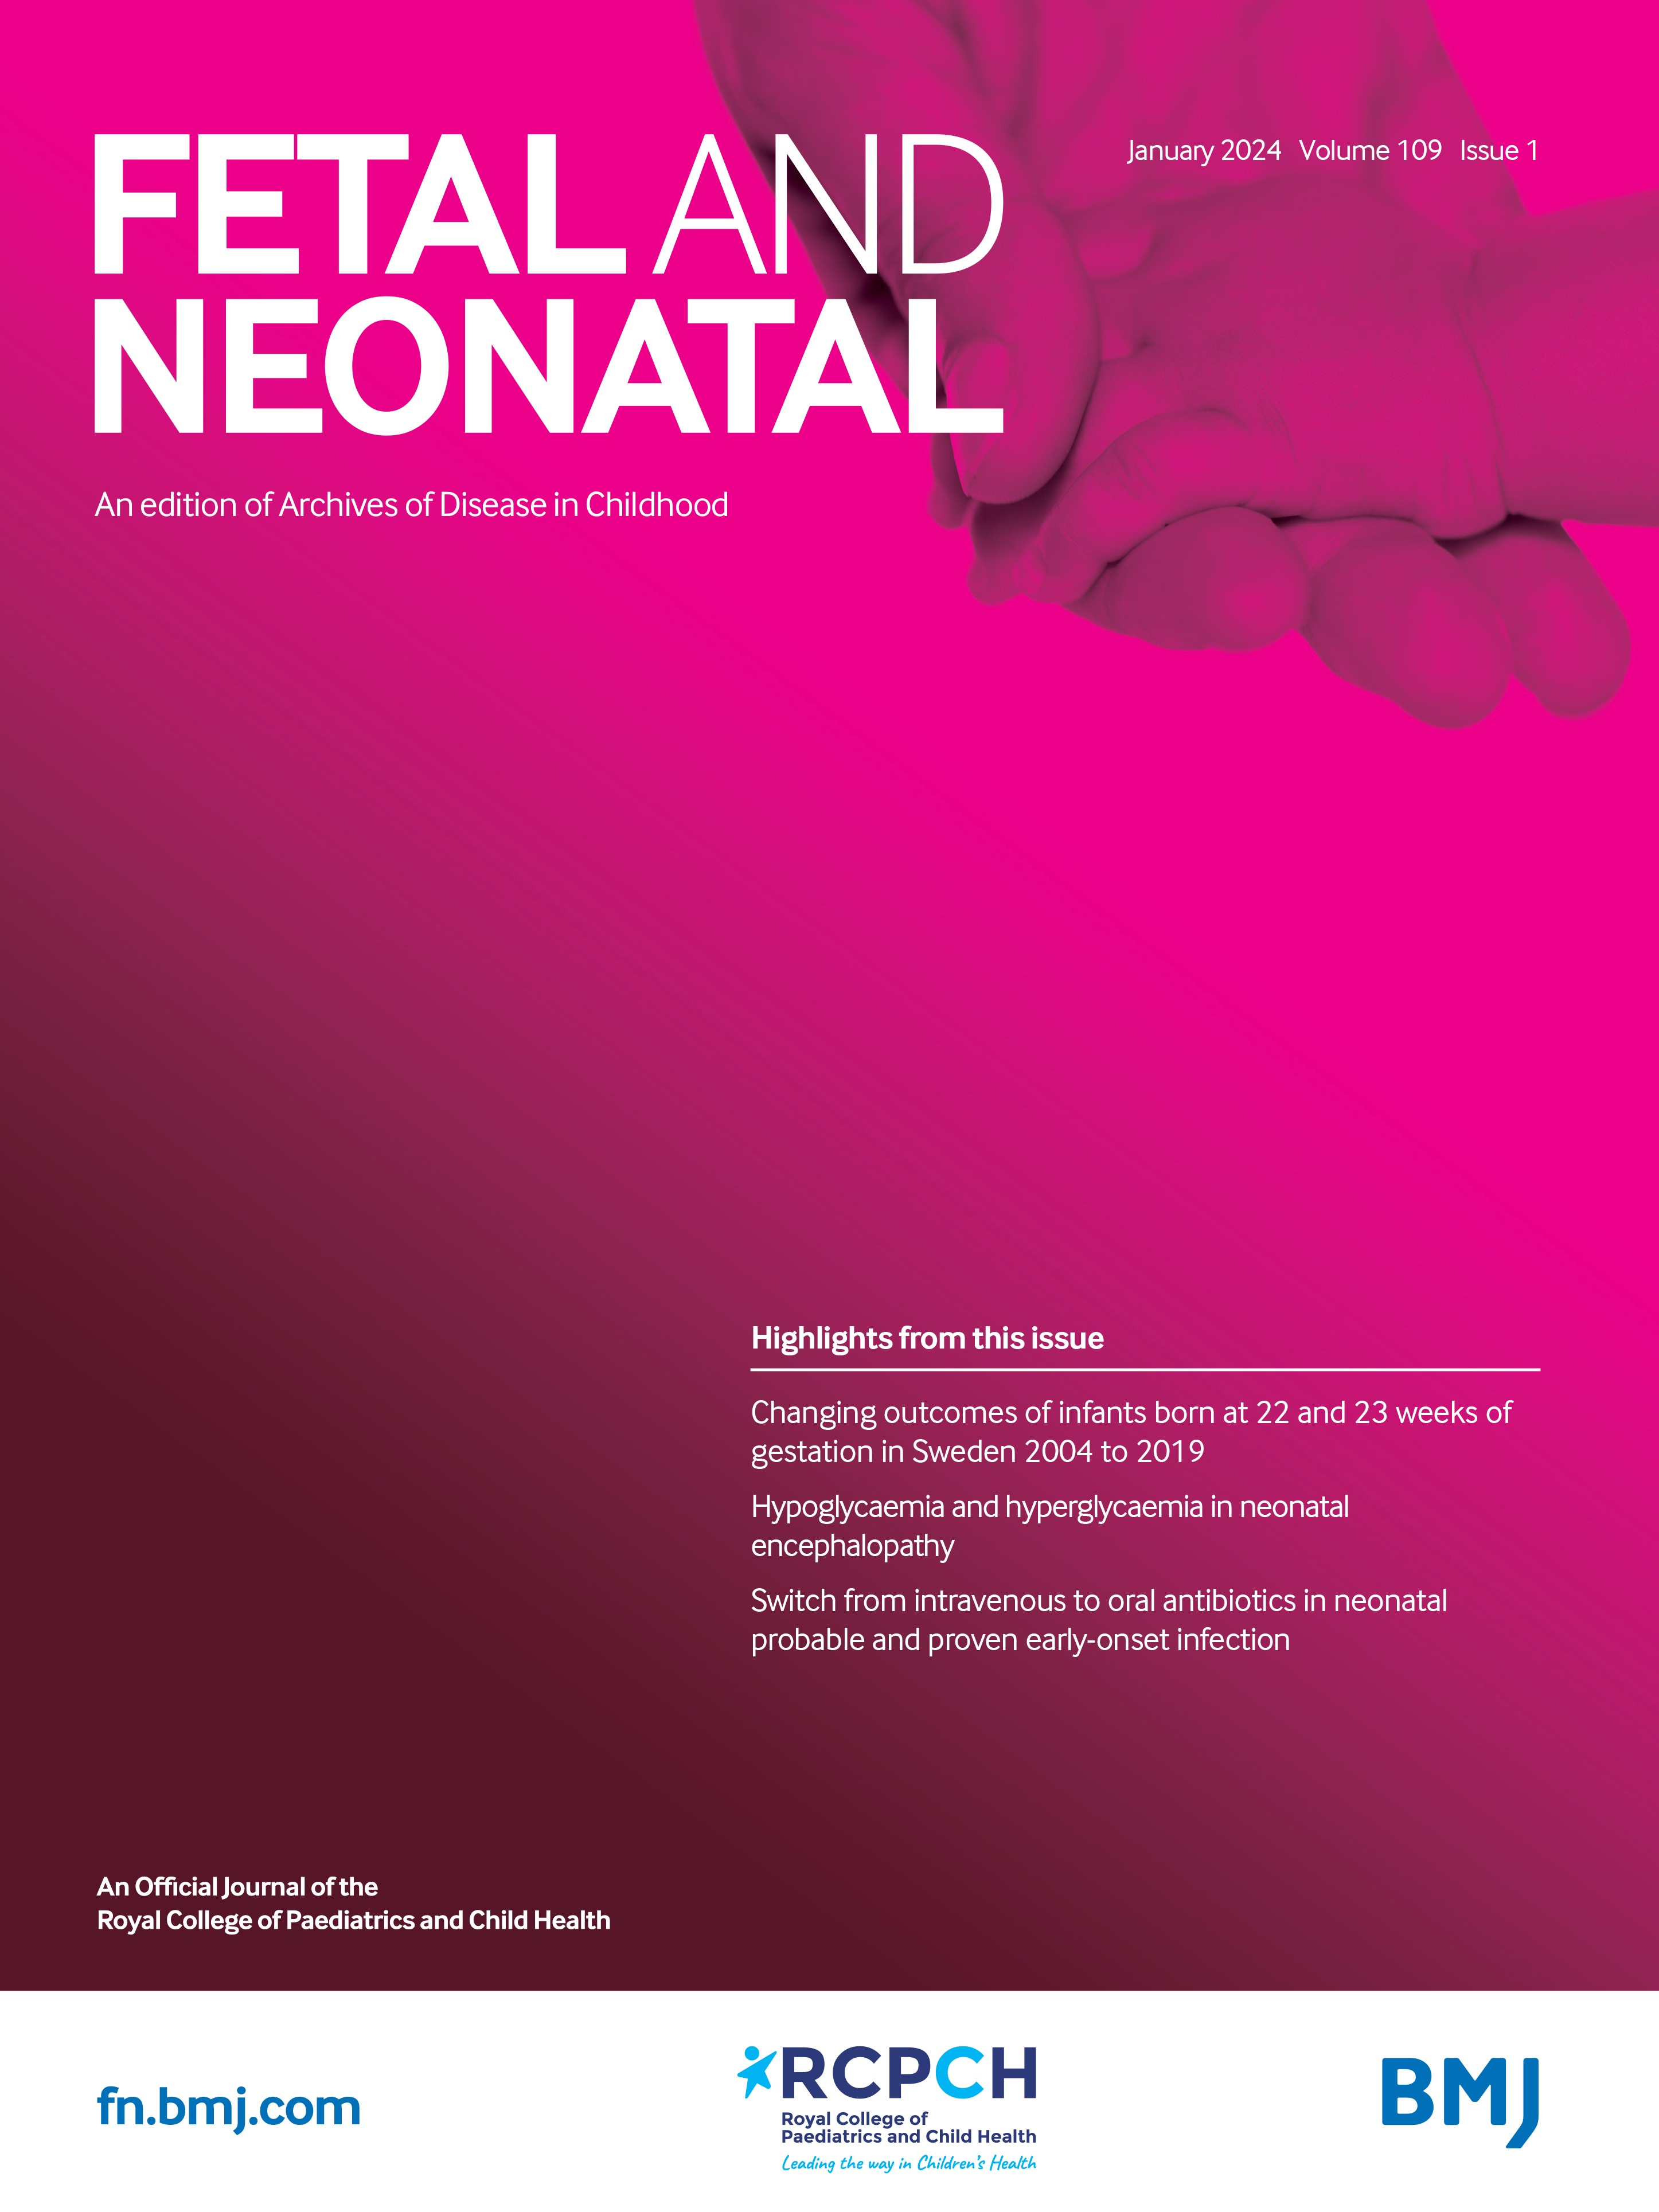 Safety and feasibility of platelet transfusion through long catheters in the neonatal intensive care unit: an in vitro study